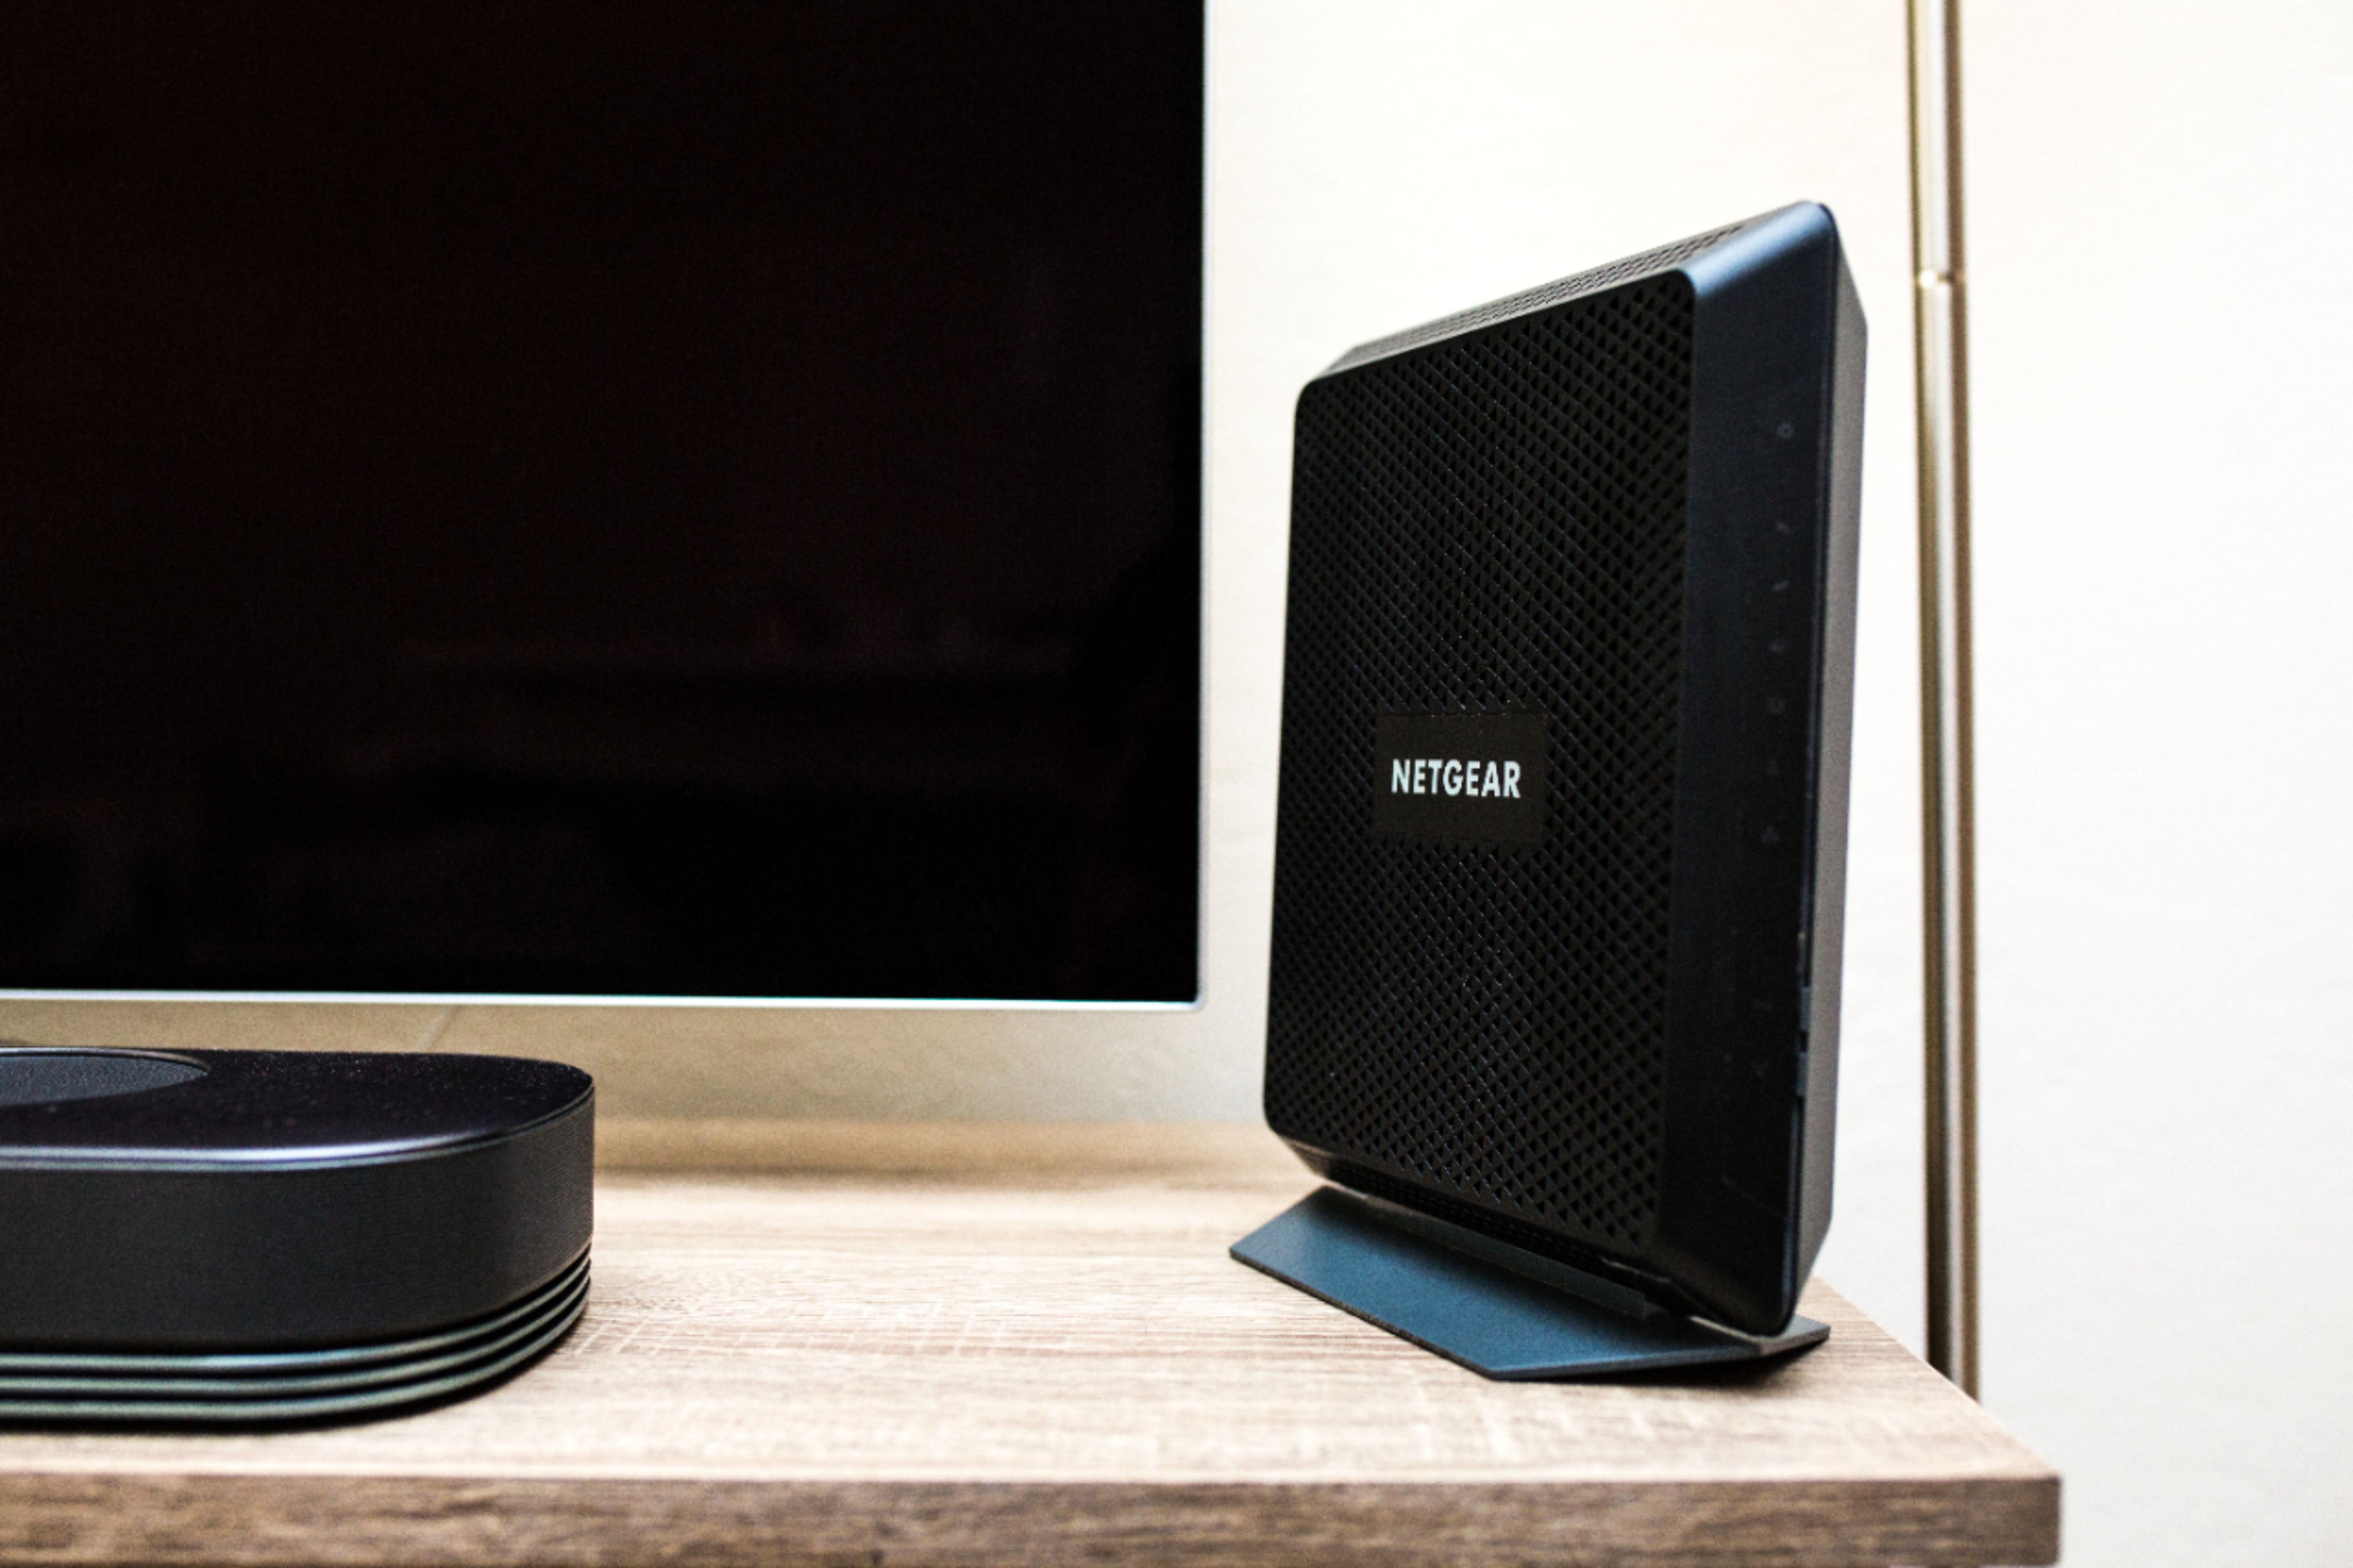 NETGEAR - Nighthawk Dual-Band AC1900 Router with 24 x 8 DOCSIS 3.0